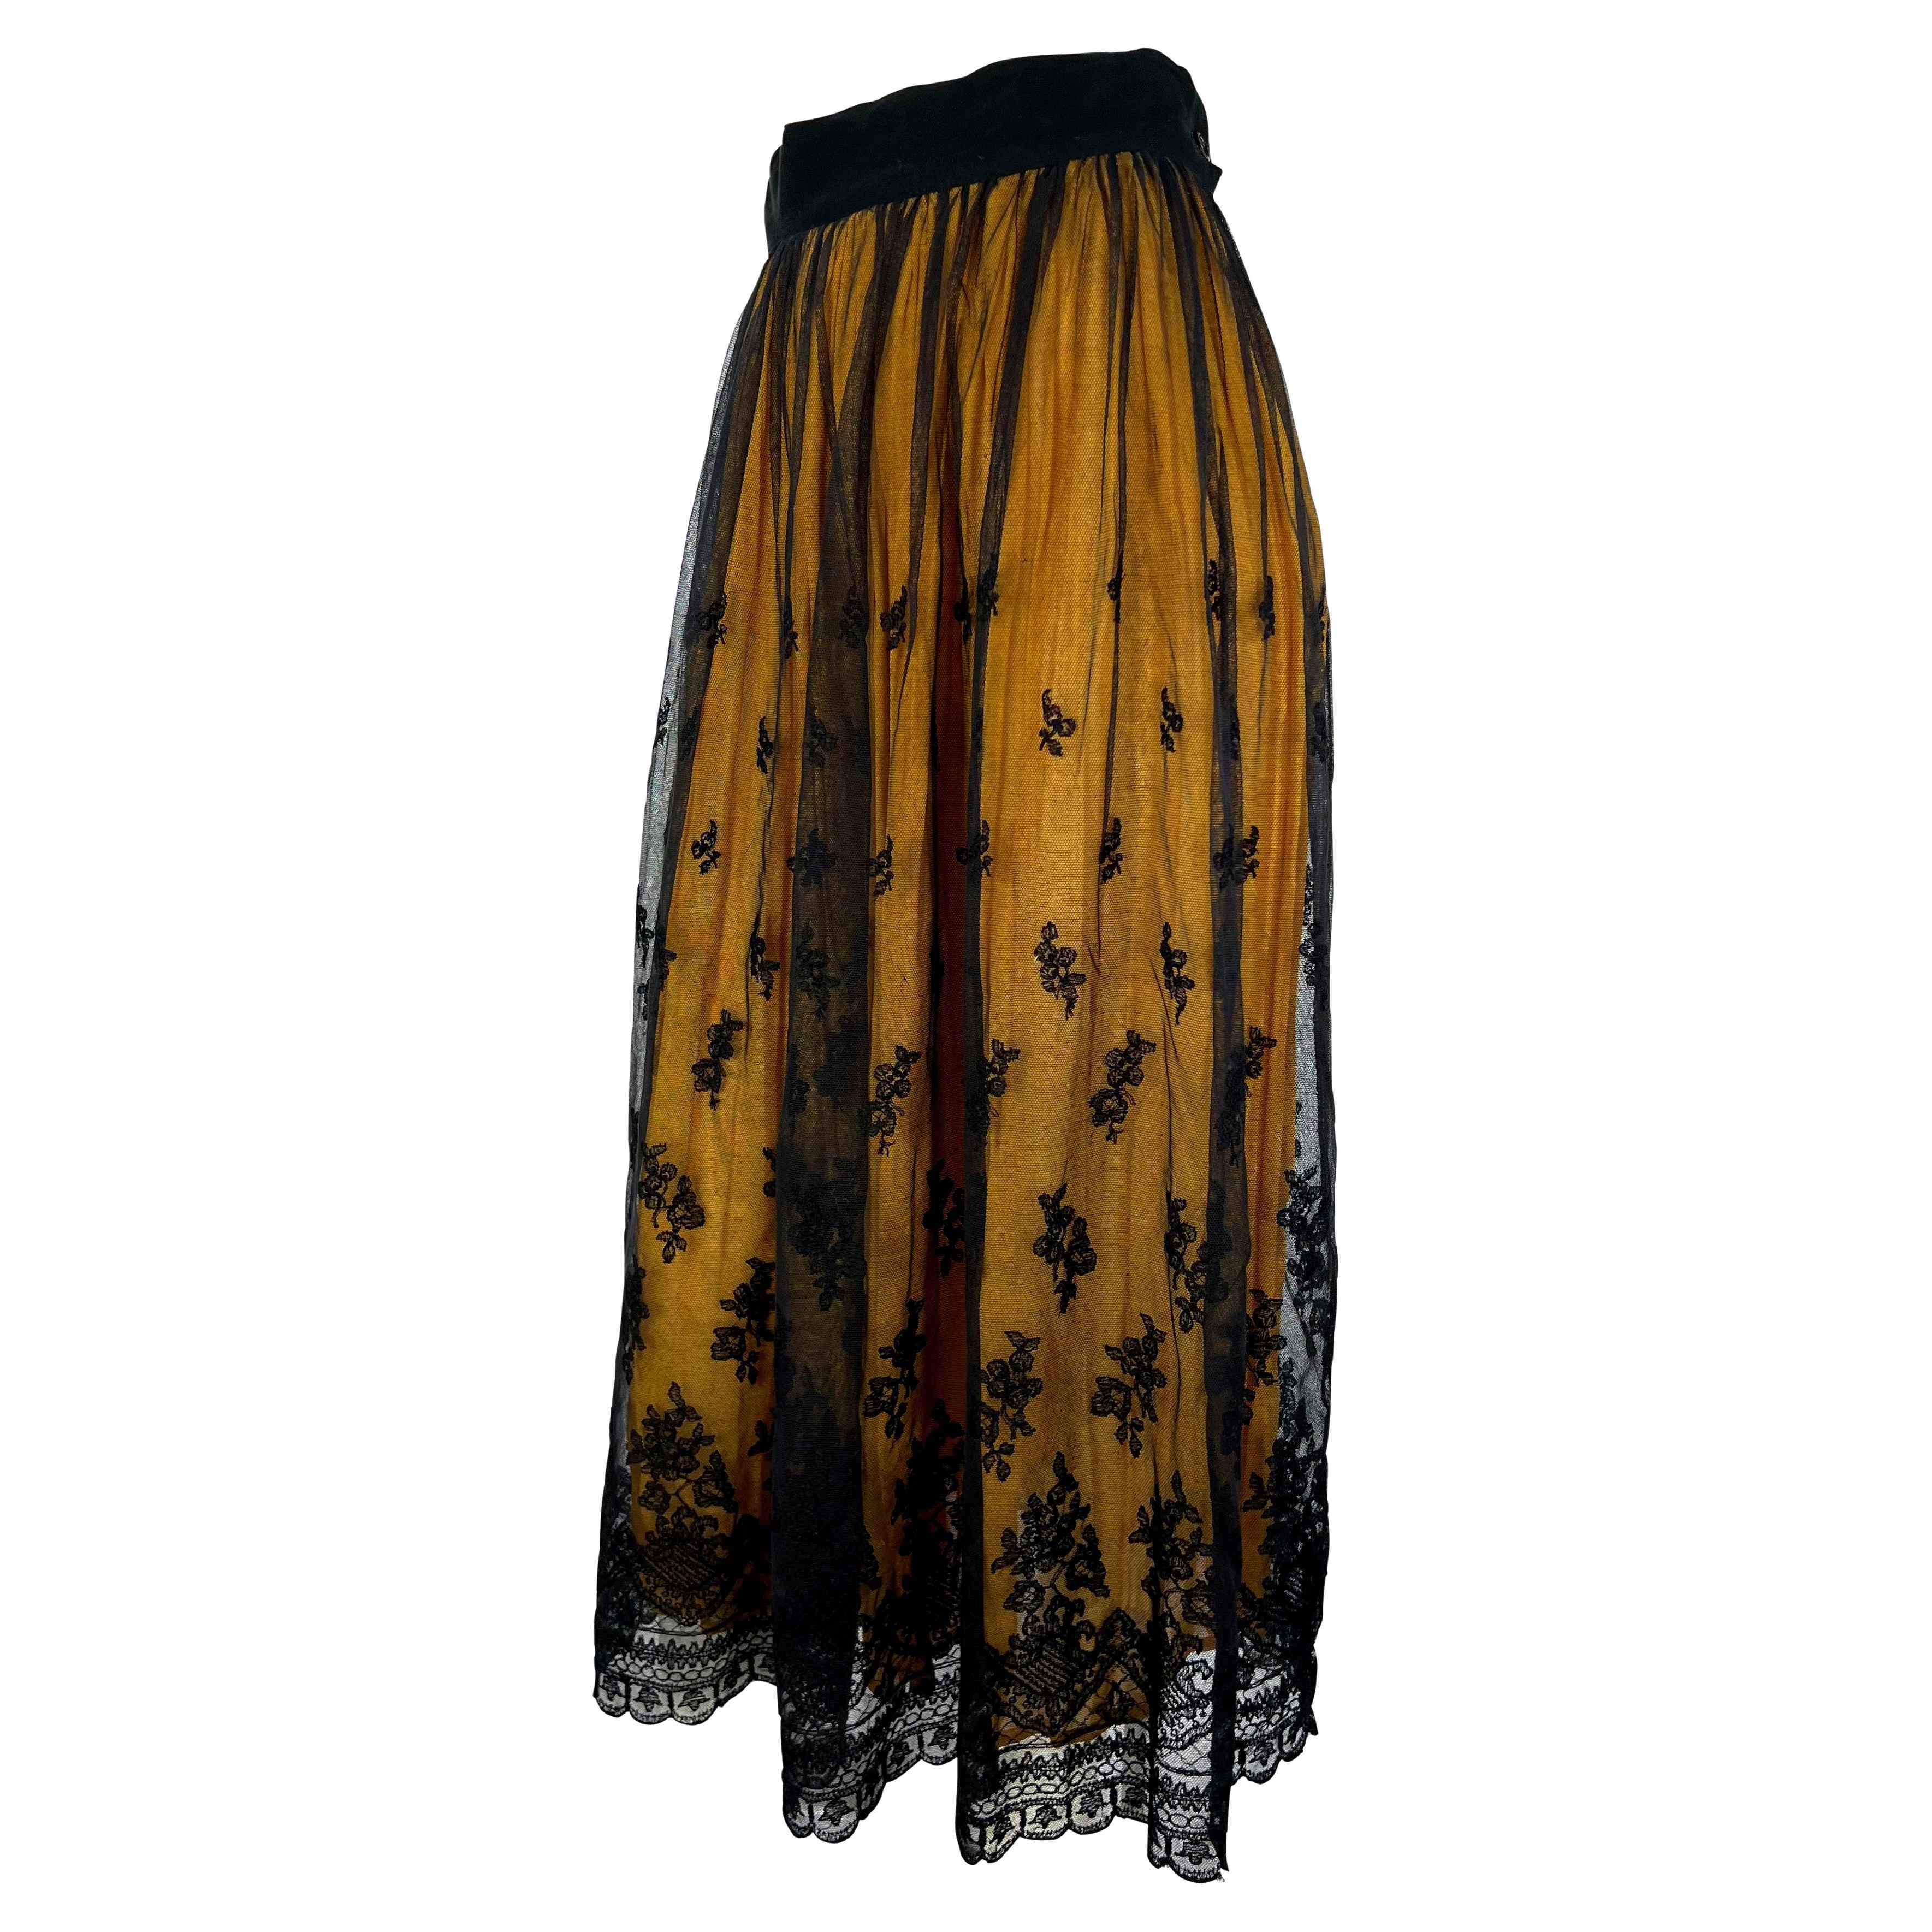 Presenting a black lace and yellow chiffon maxi skirt designed by Dolce & Gabbana in the early 1990s. This piece represents D&G's ability to combine classic Sicilian design elements with pin-up sex appeal. Check out our storefront for more vintage